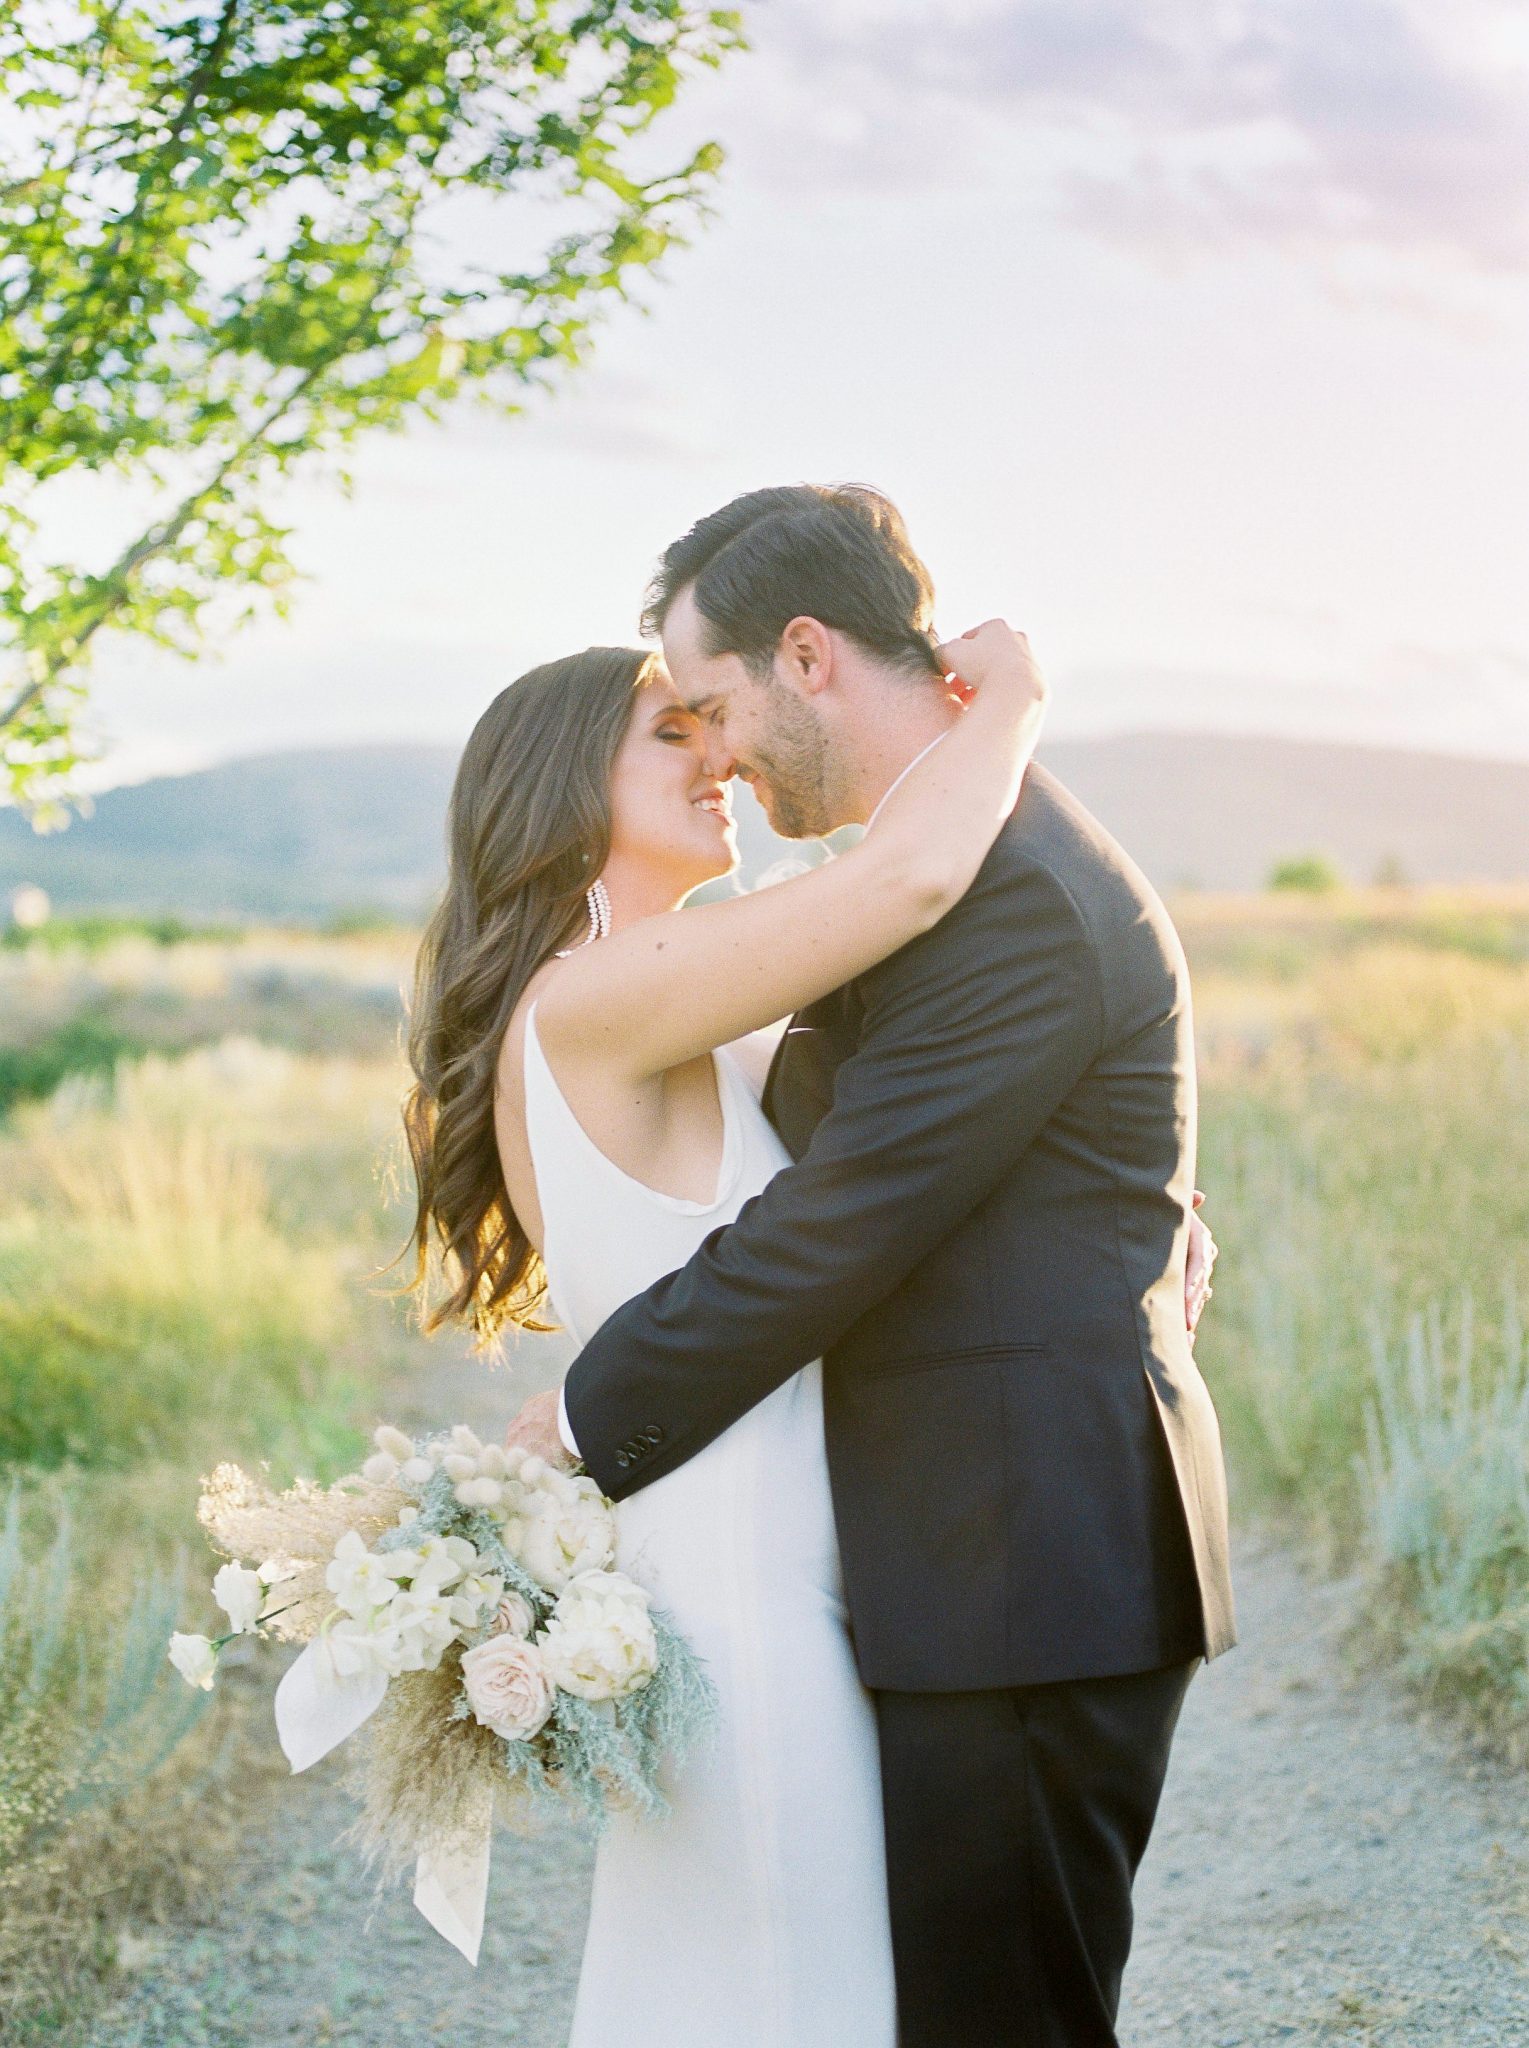 Bride and groom pose at sunset in the rolling hills of the Okanagan